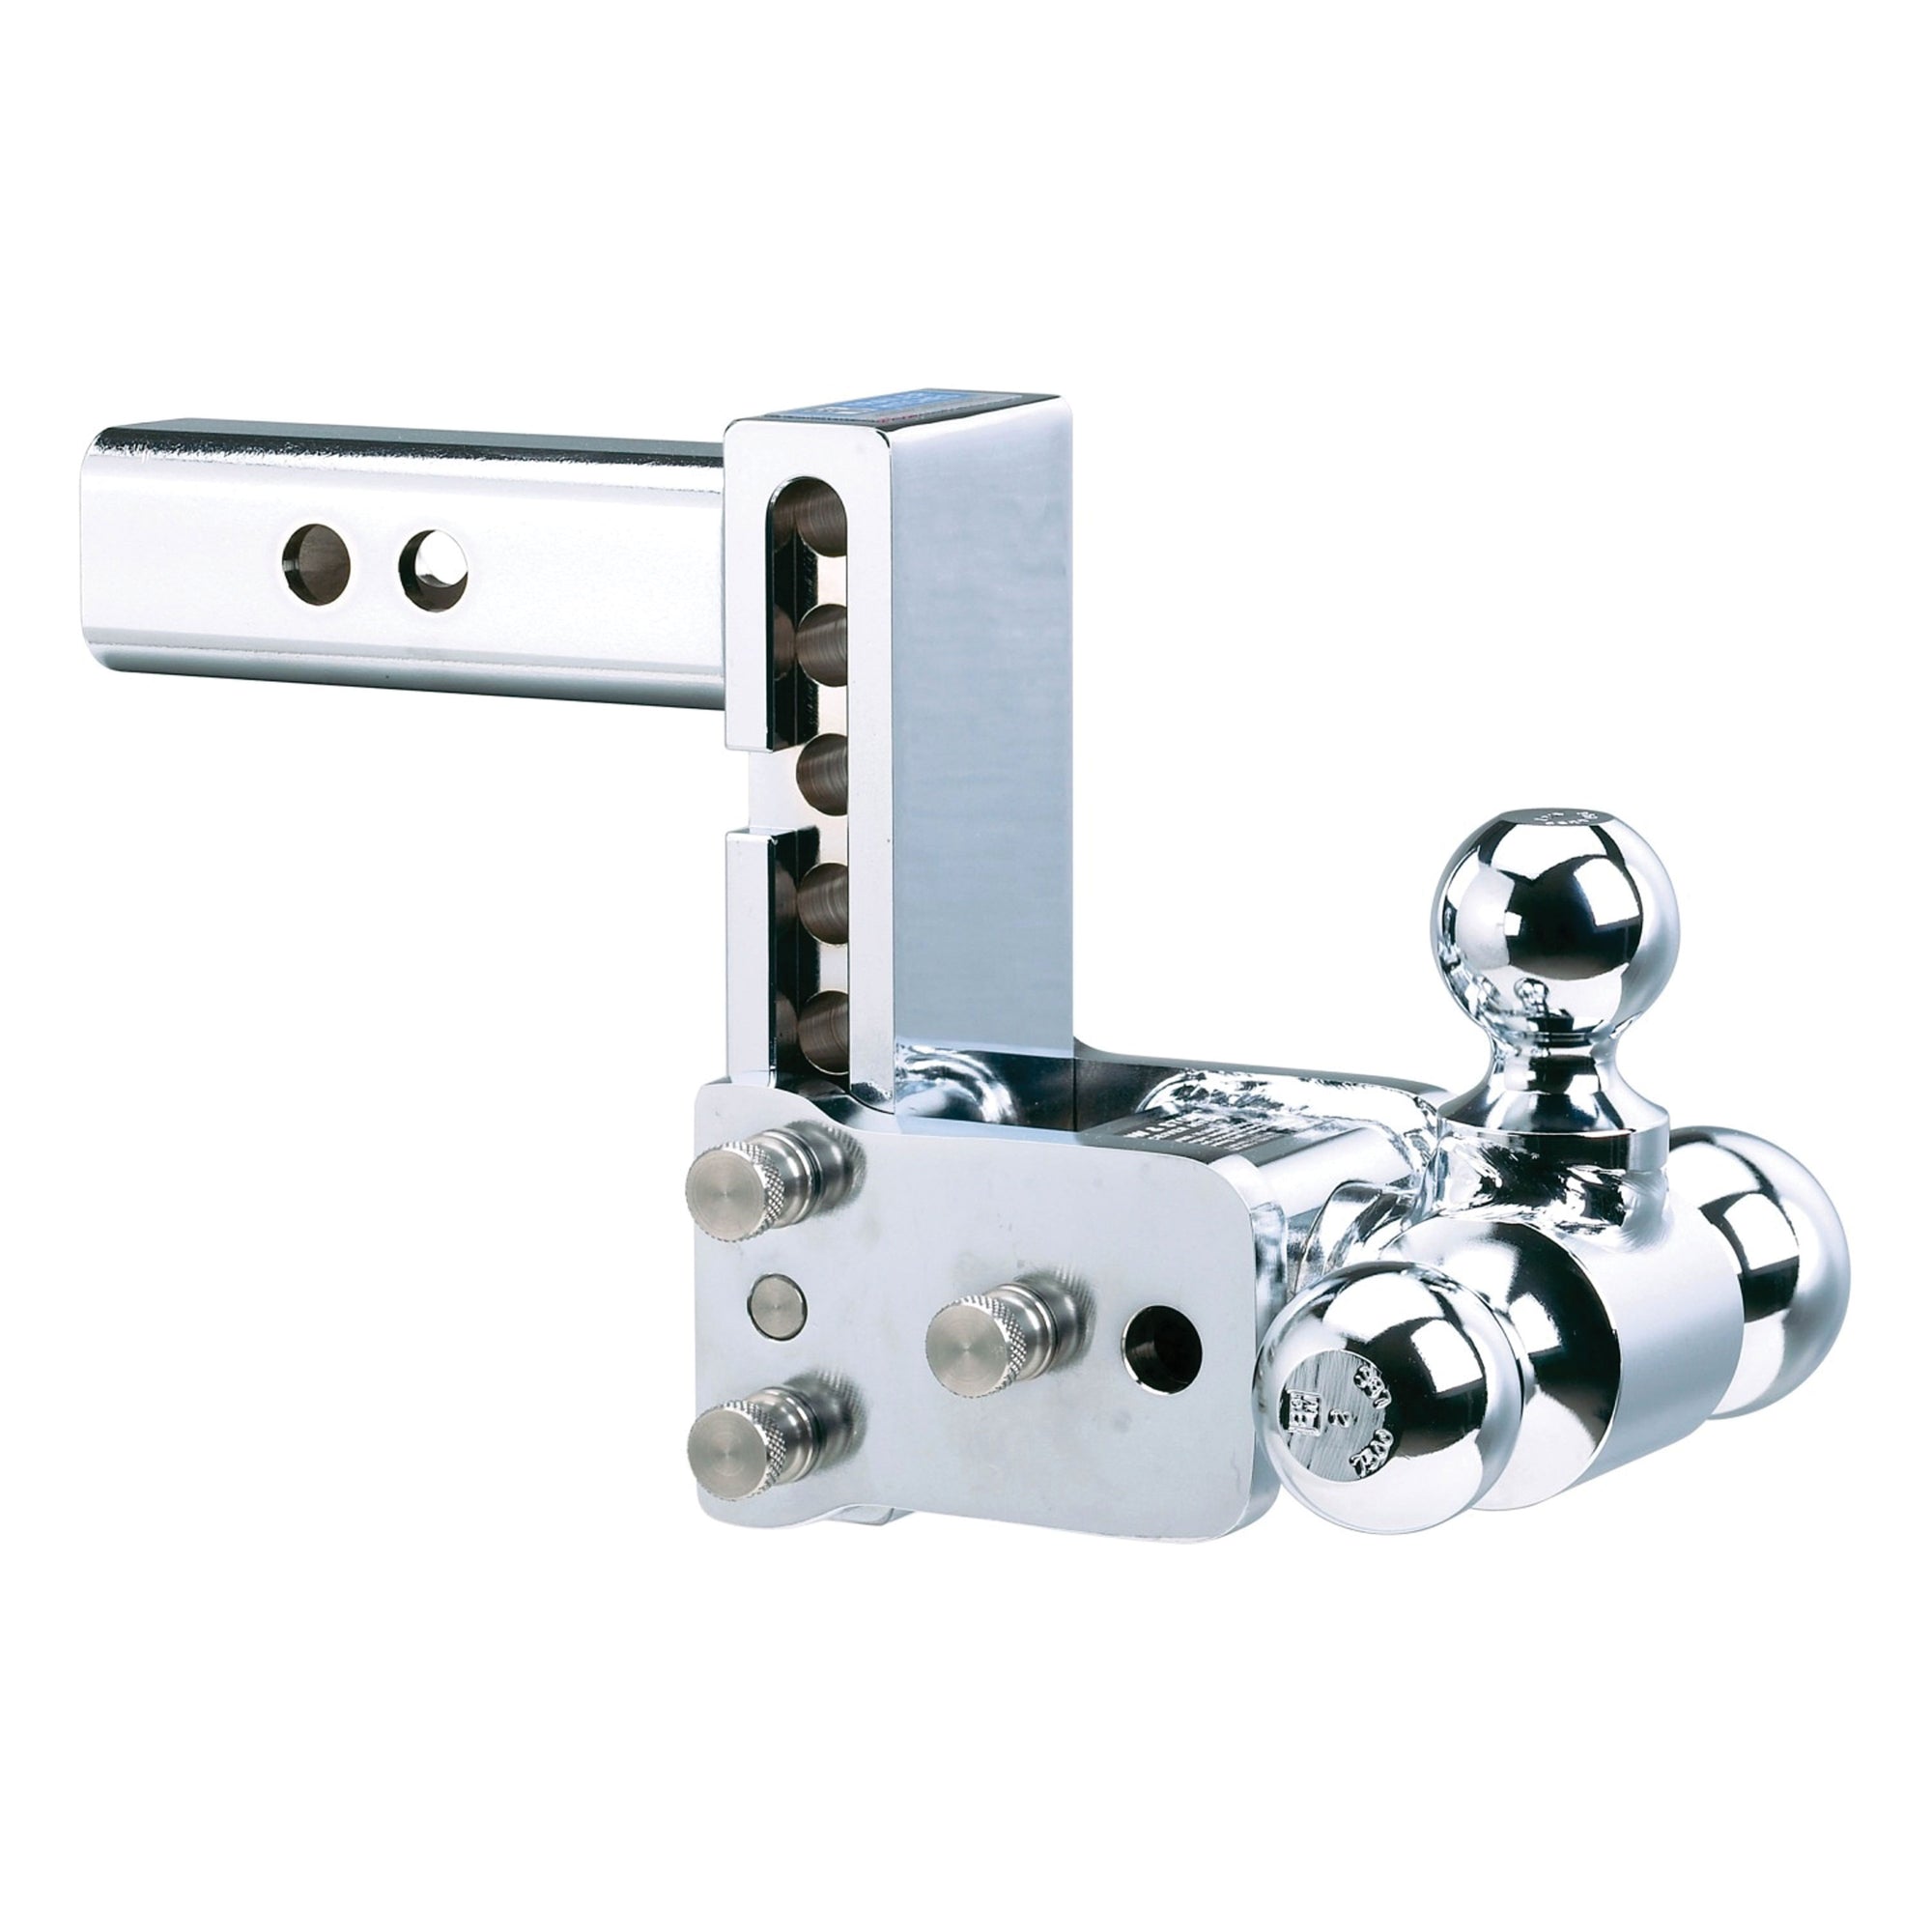 B&W Trailer Hitches TS10048C Tow and Stow Adjustable Ball Mount - 1-7/8", 2" & 2-5/16" Ball, 5" Drop, 5.5" Rise, Chrome